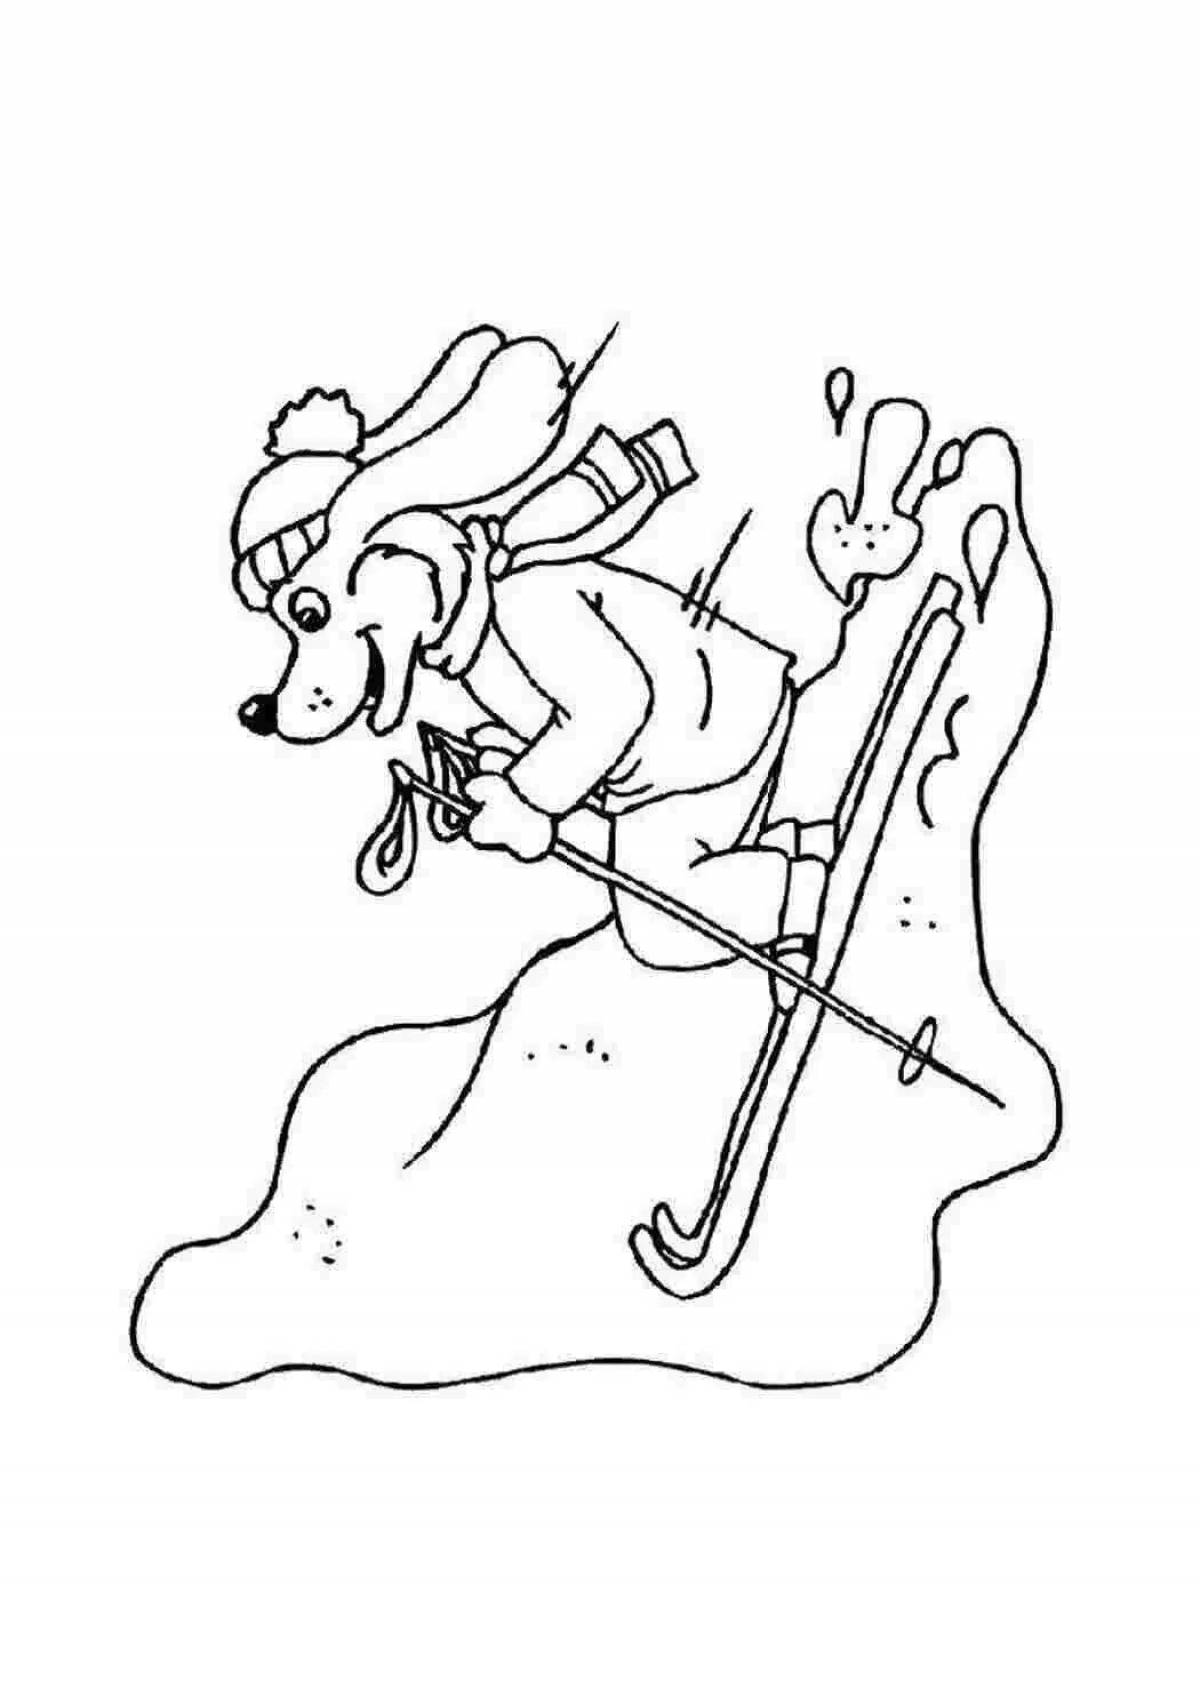 Coloring page funny bear on skis